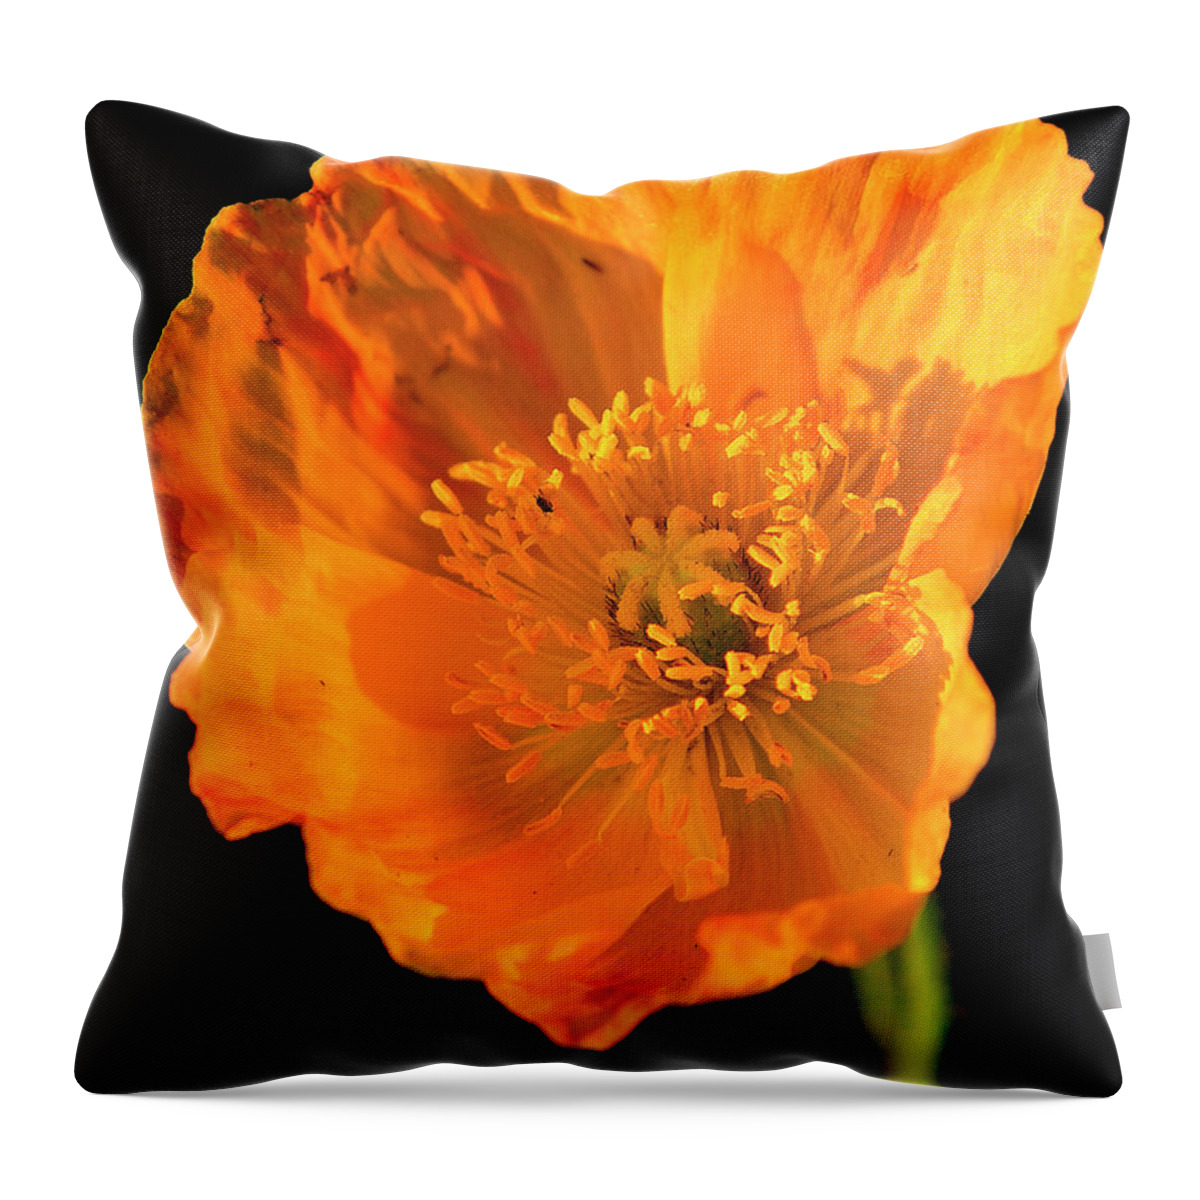 Flower Throw Pillow featuring the photograph Poppy by Bill Dodsworth